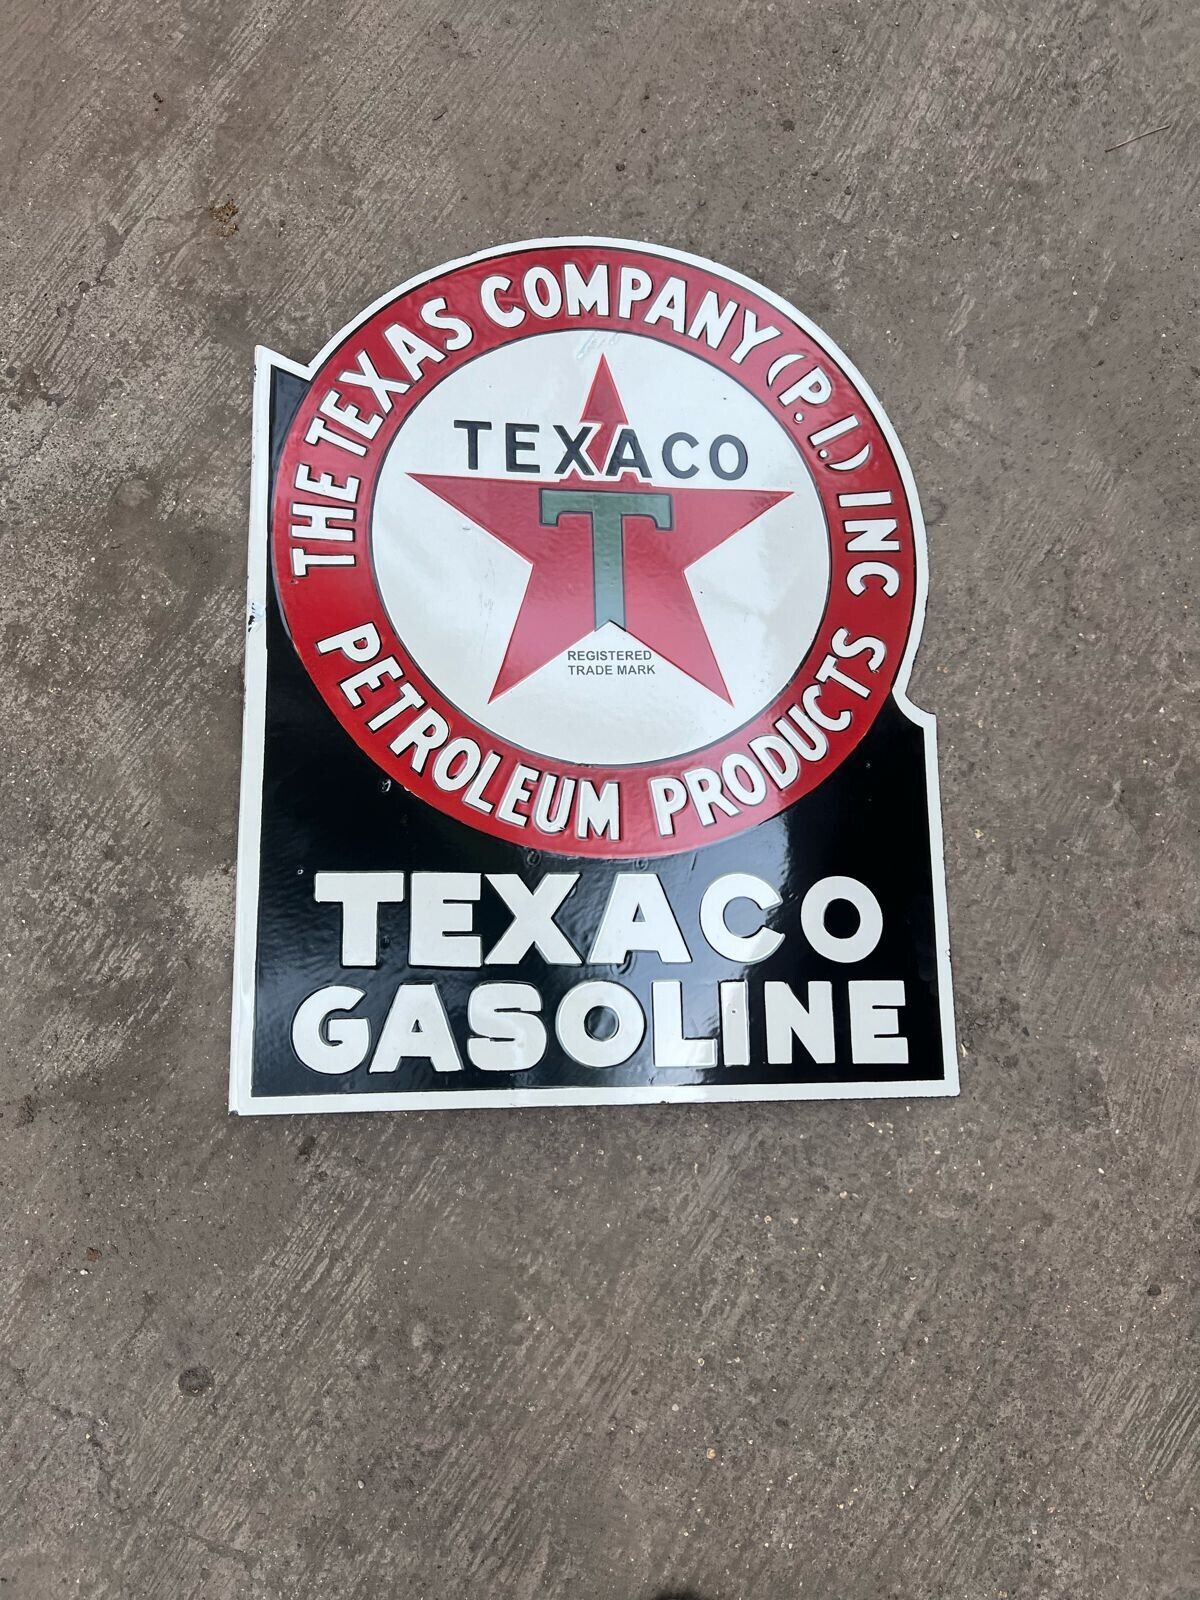 RARE PORCELAIN TEXACO GASOLINE ENAMEL SIGN 28 INCHES DOUBLE SIDED WITH FLANGE